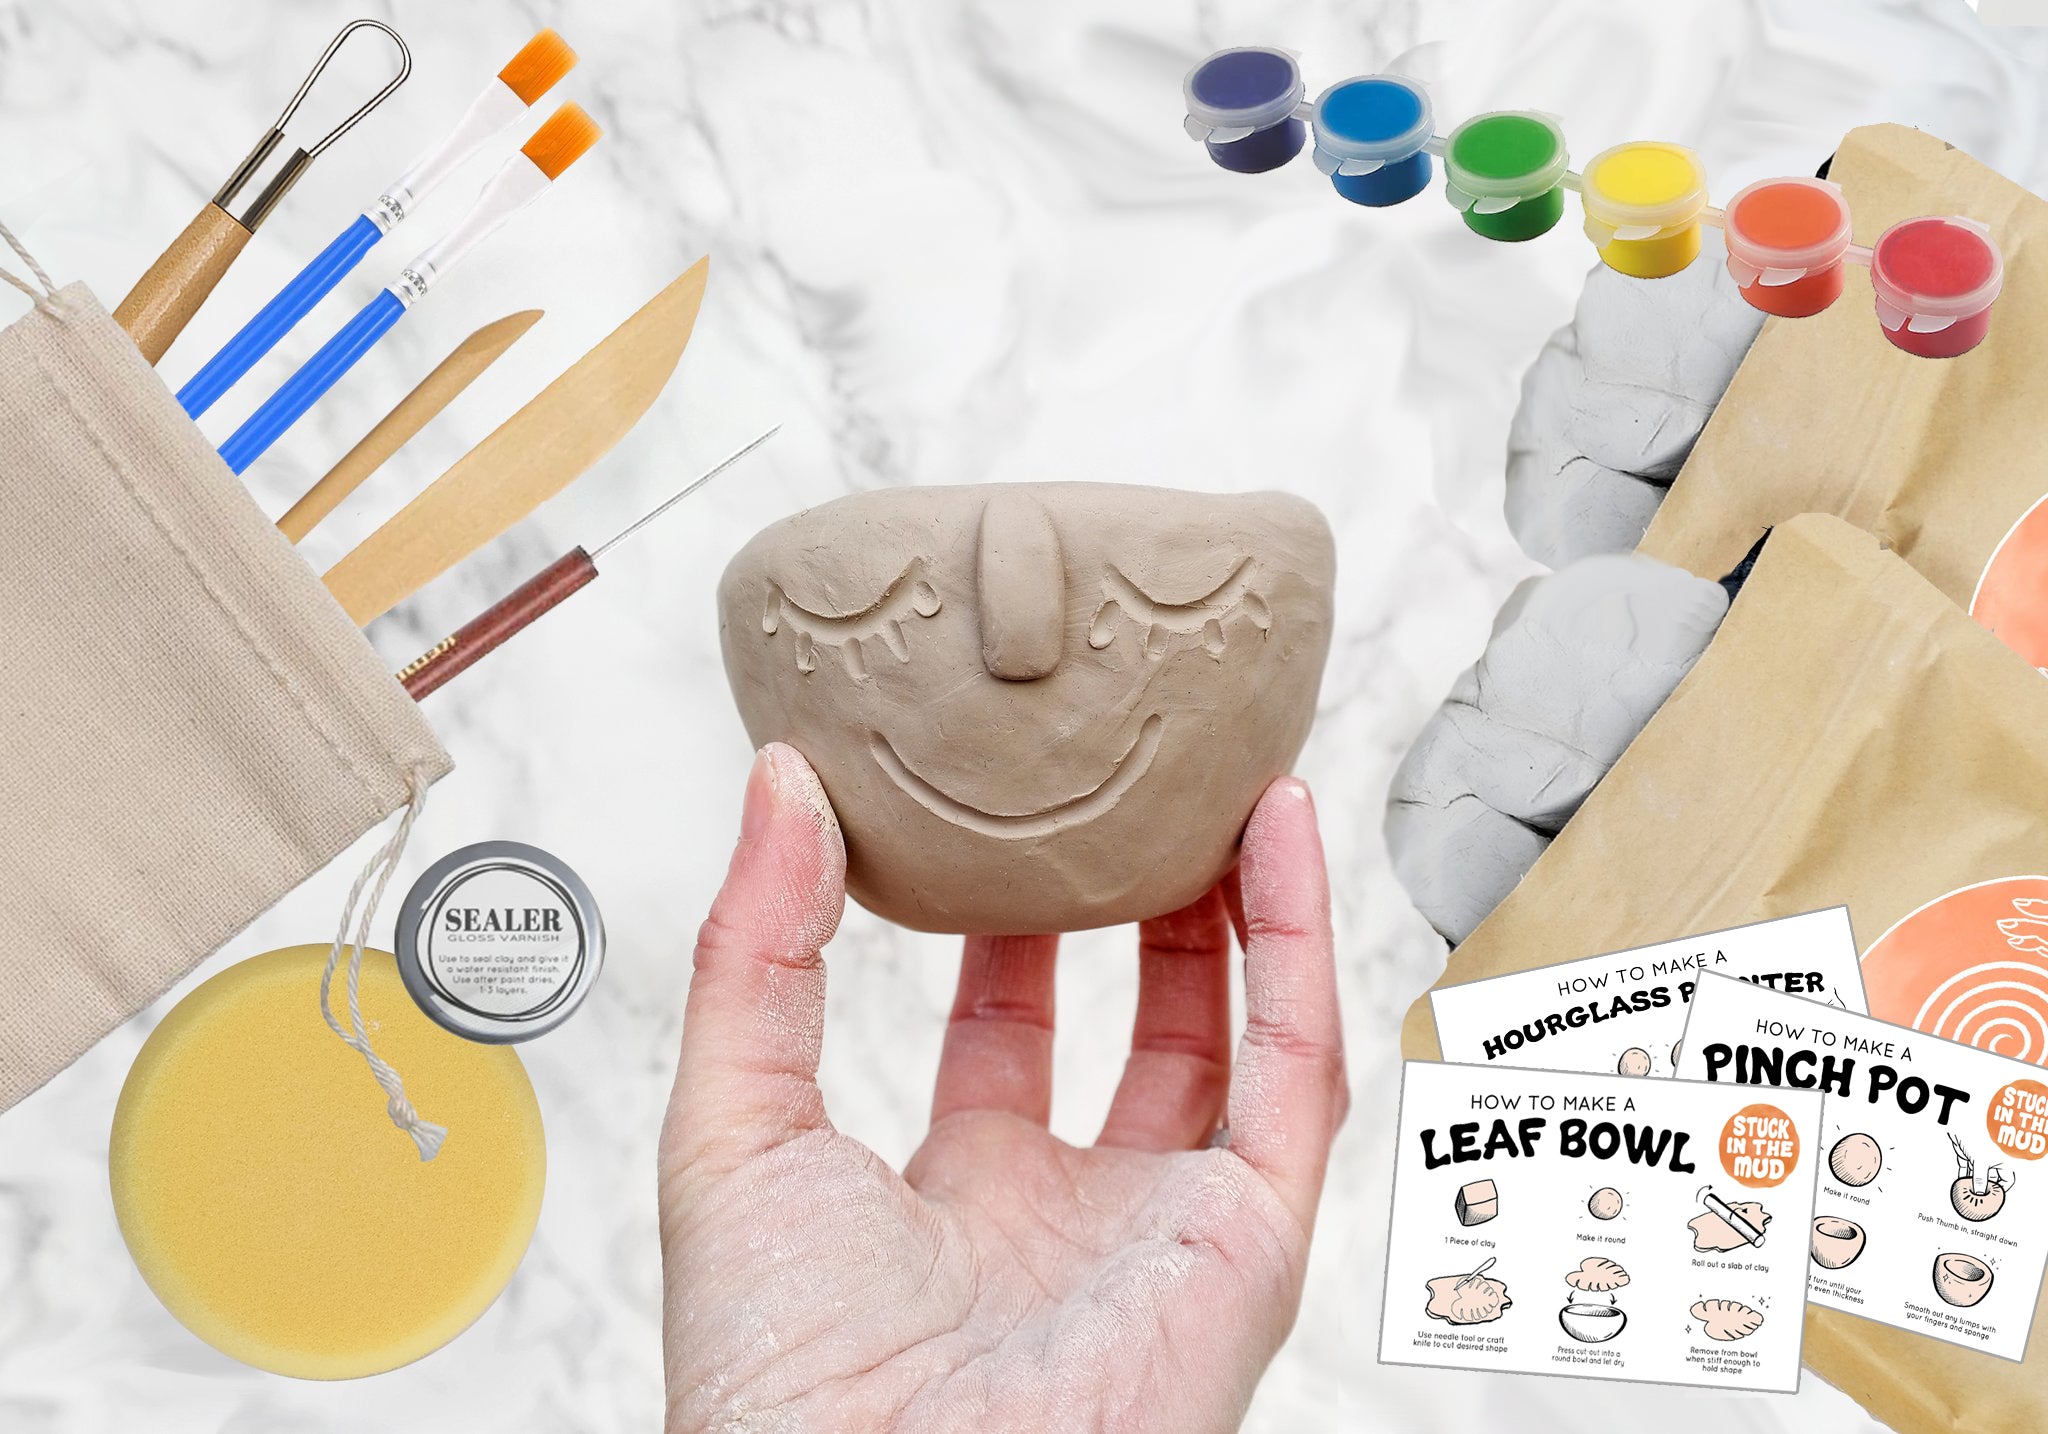 Create Your Own Clay Pottery Kit Home Pottery Craft Kit 1-2 People